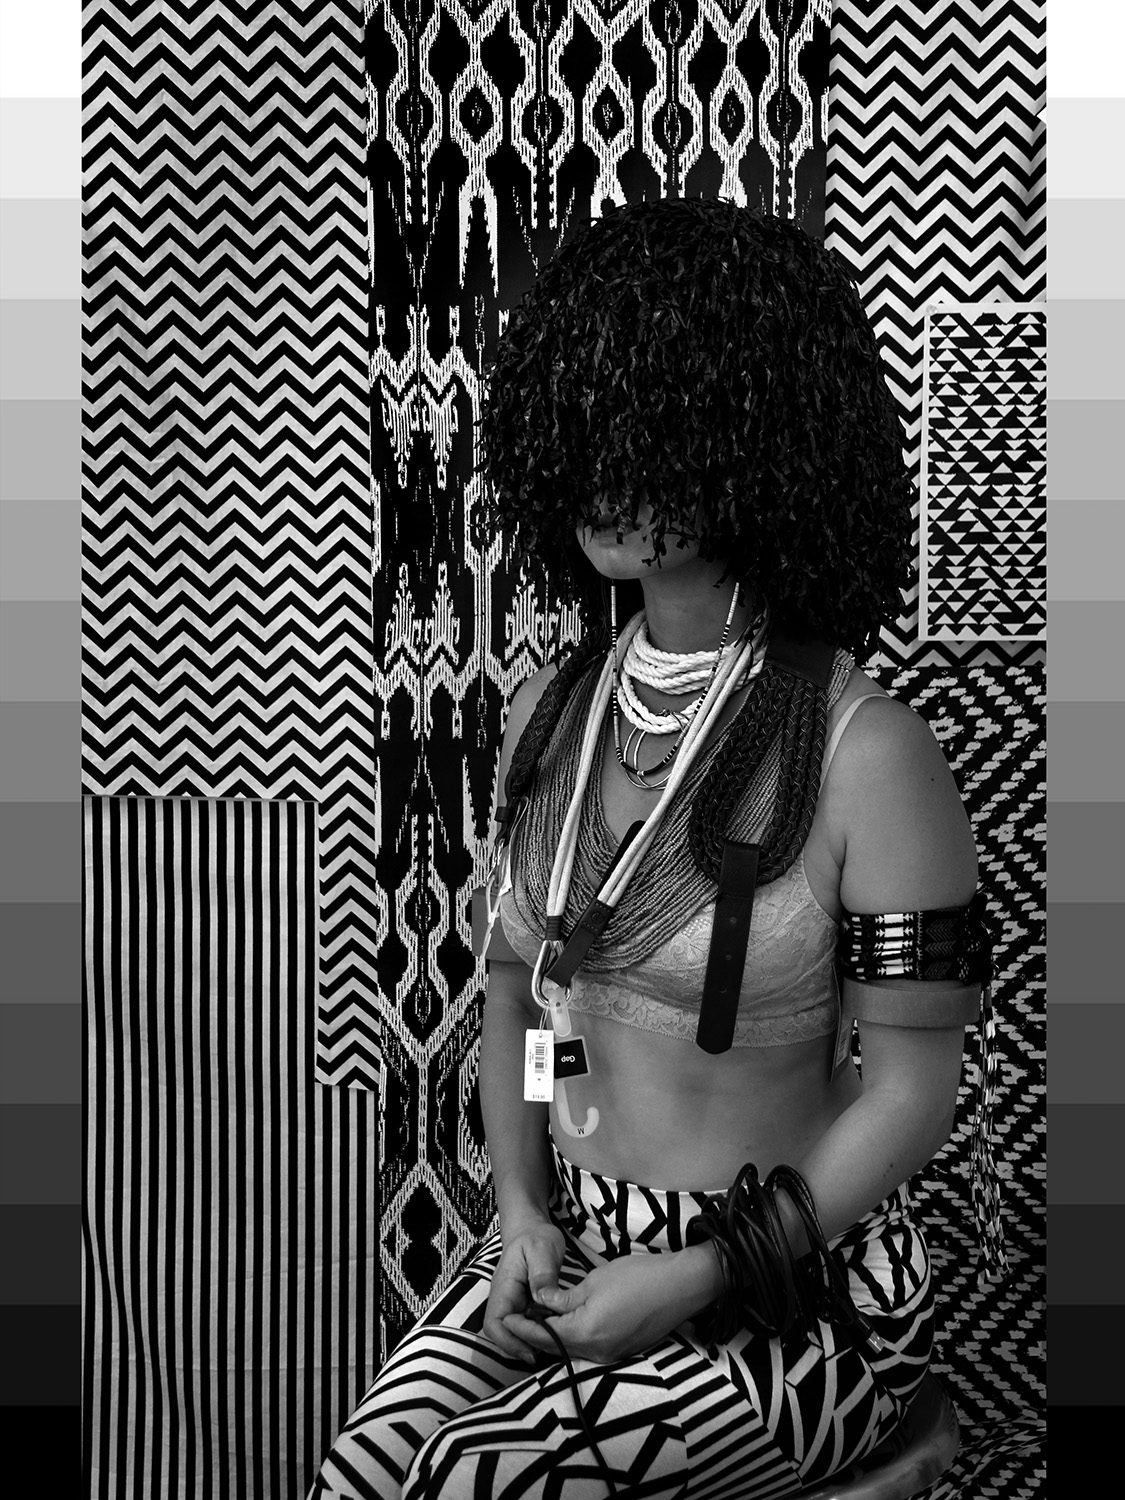 Woman in indigenous dress with something on her head covering her eyes, a hanger on her neck with a price tag in black and white